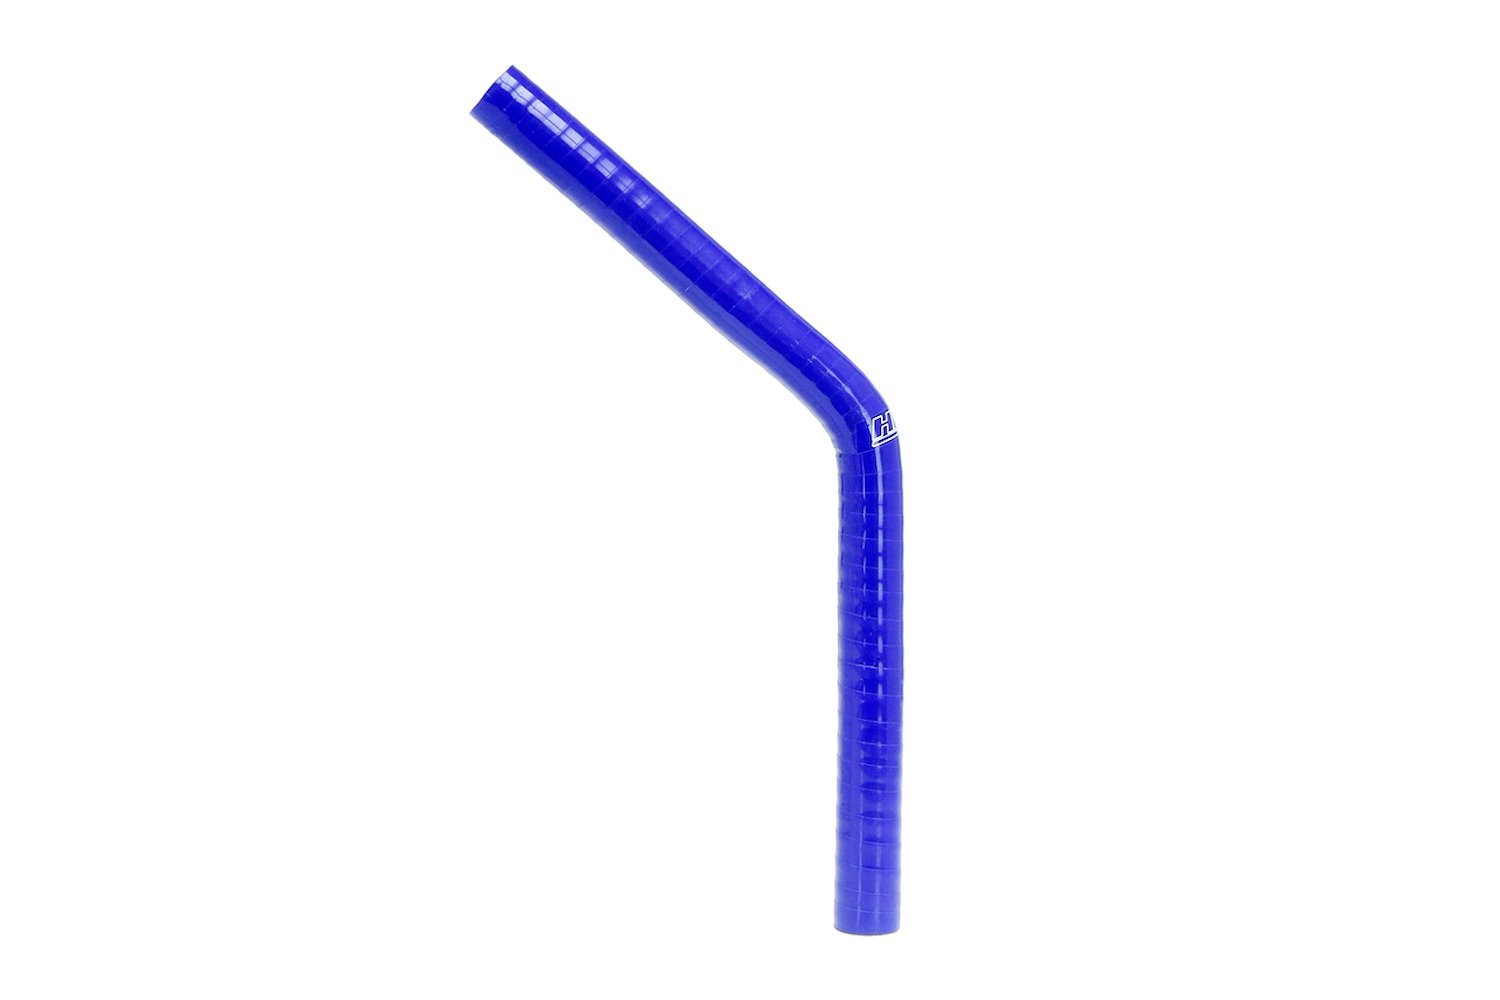 HTSEC45-150-L10-BLUE Silicone 45-Degree Elbow Hose, High-Temp 4-Ply Reinforced, 1-1/2 in. ID, 10 in. Leg, Blue